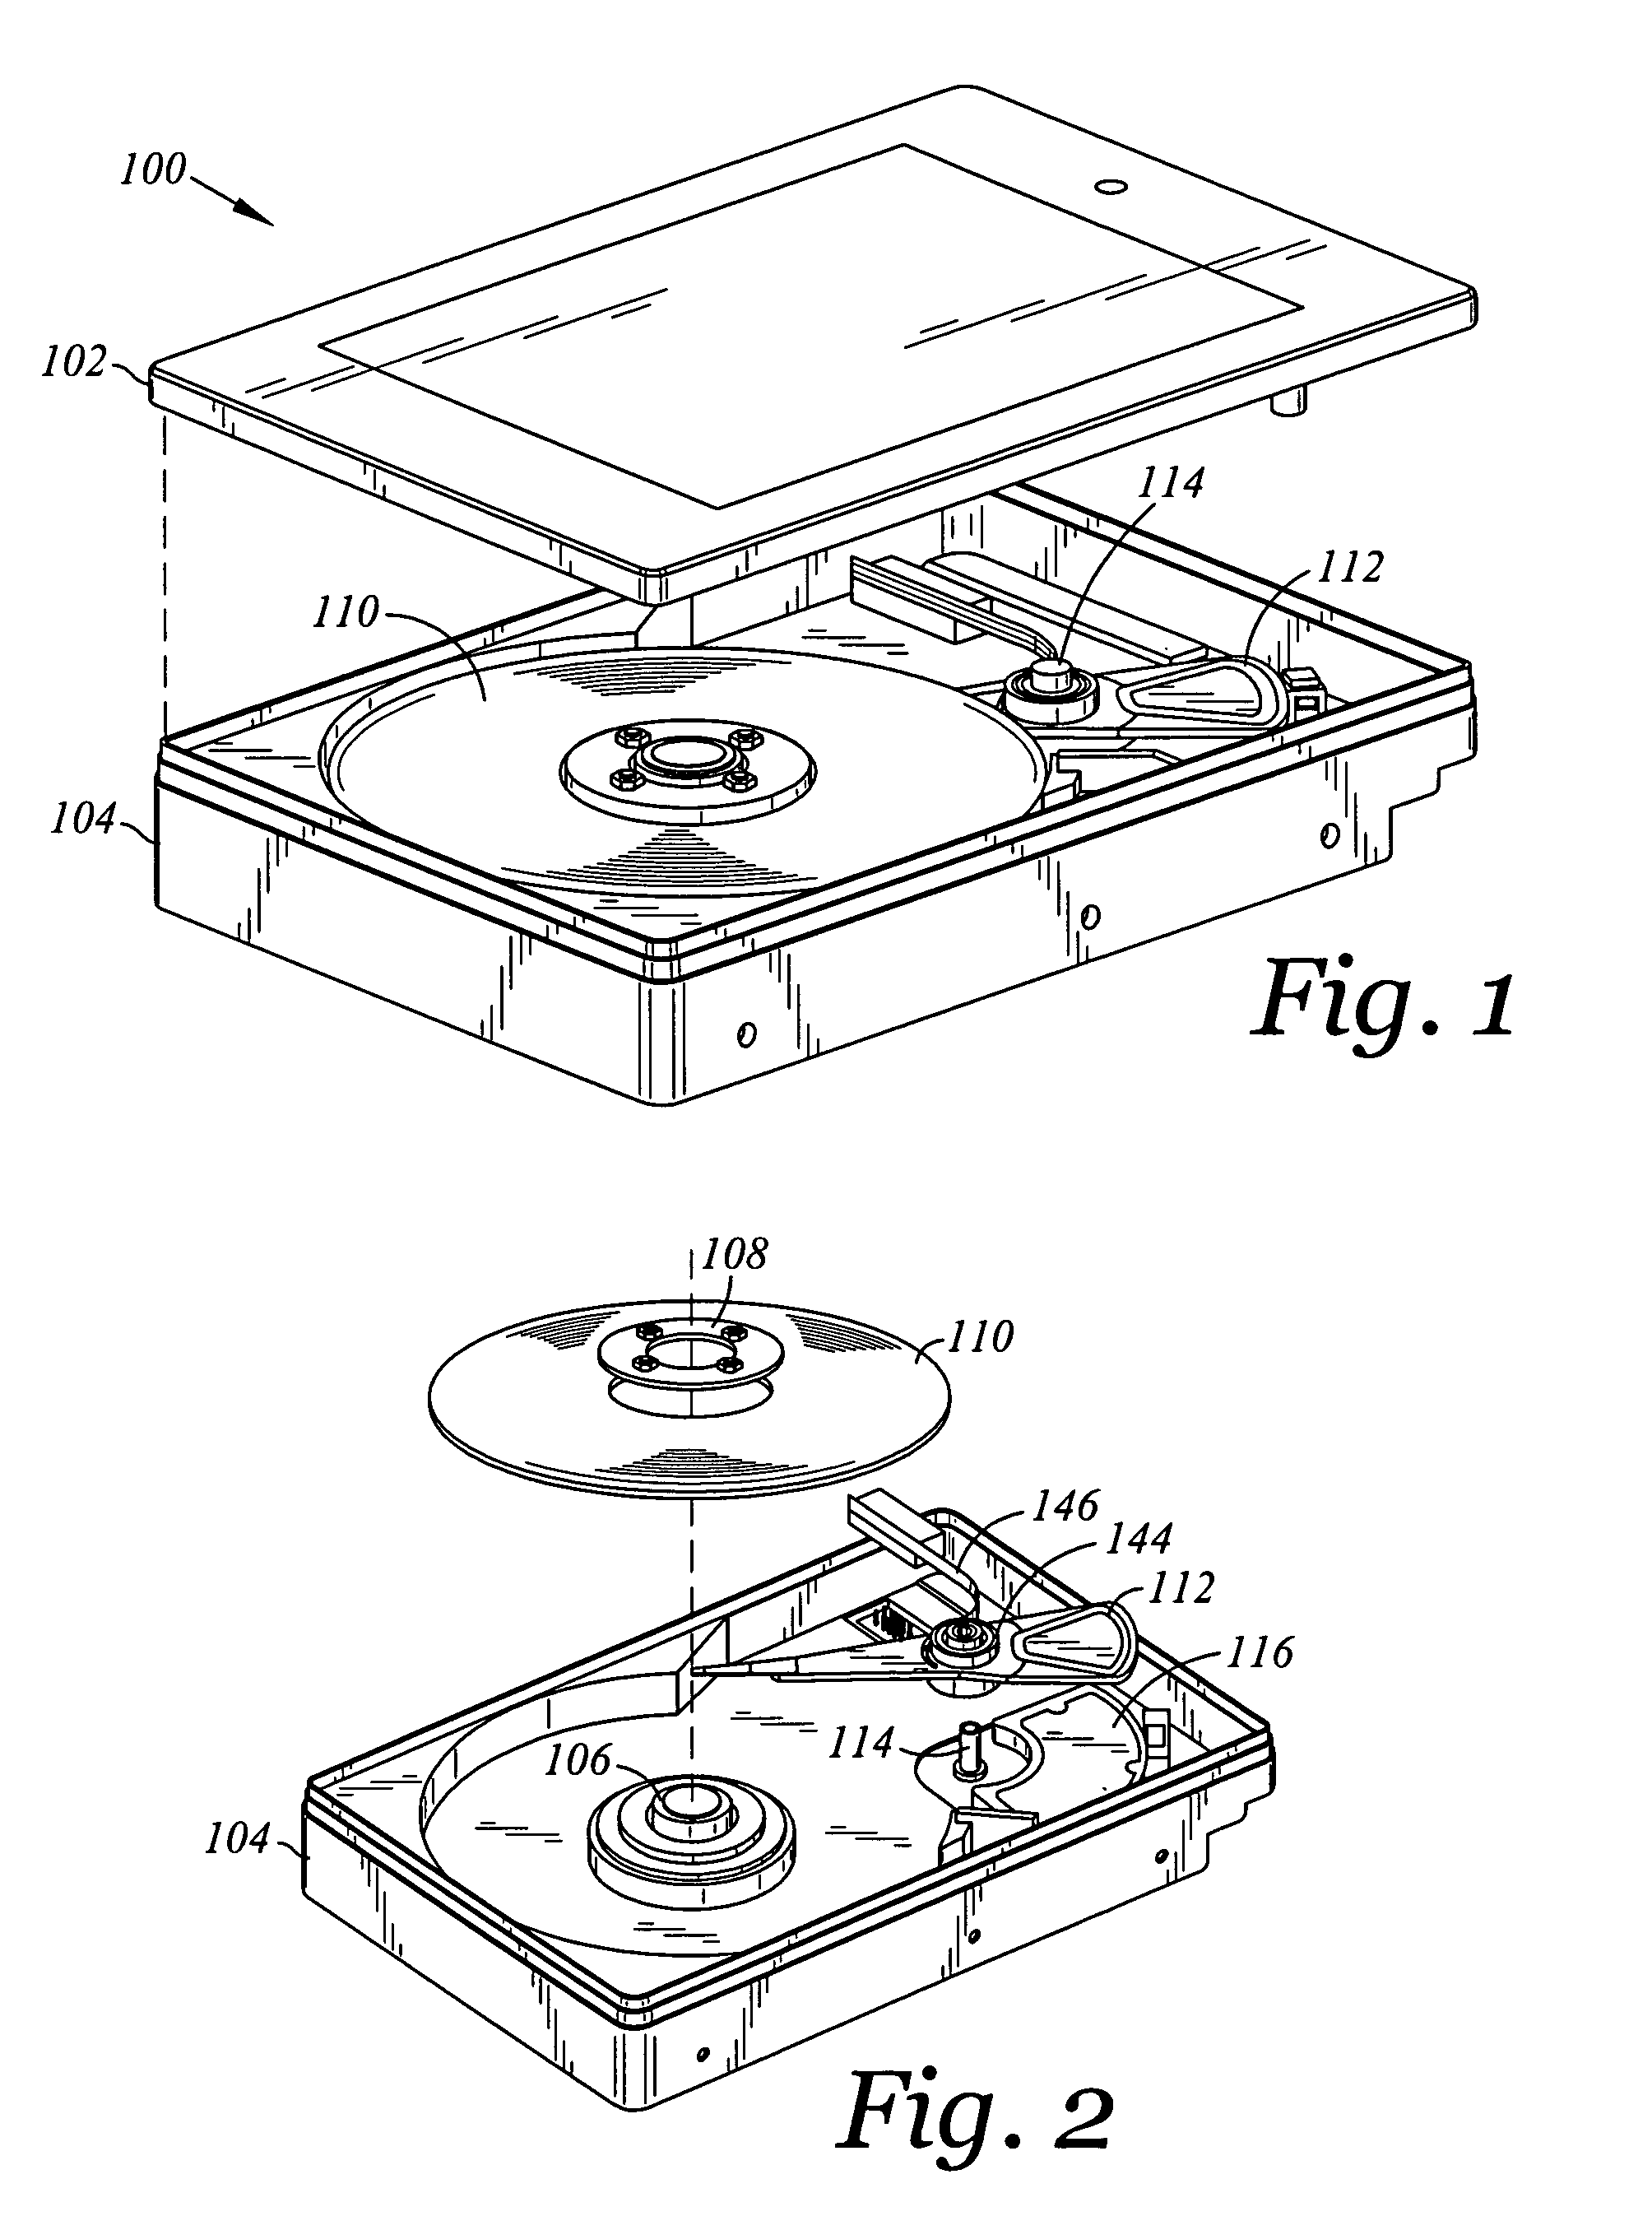 Head stack assembly having an actuator body with multiple slots adjacent to a bore